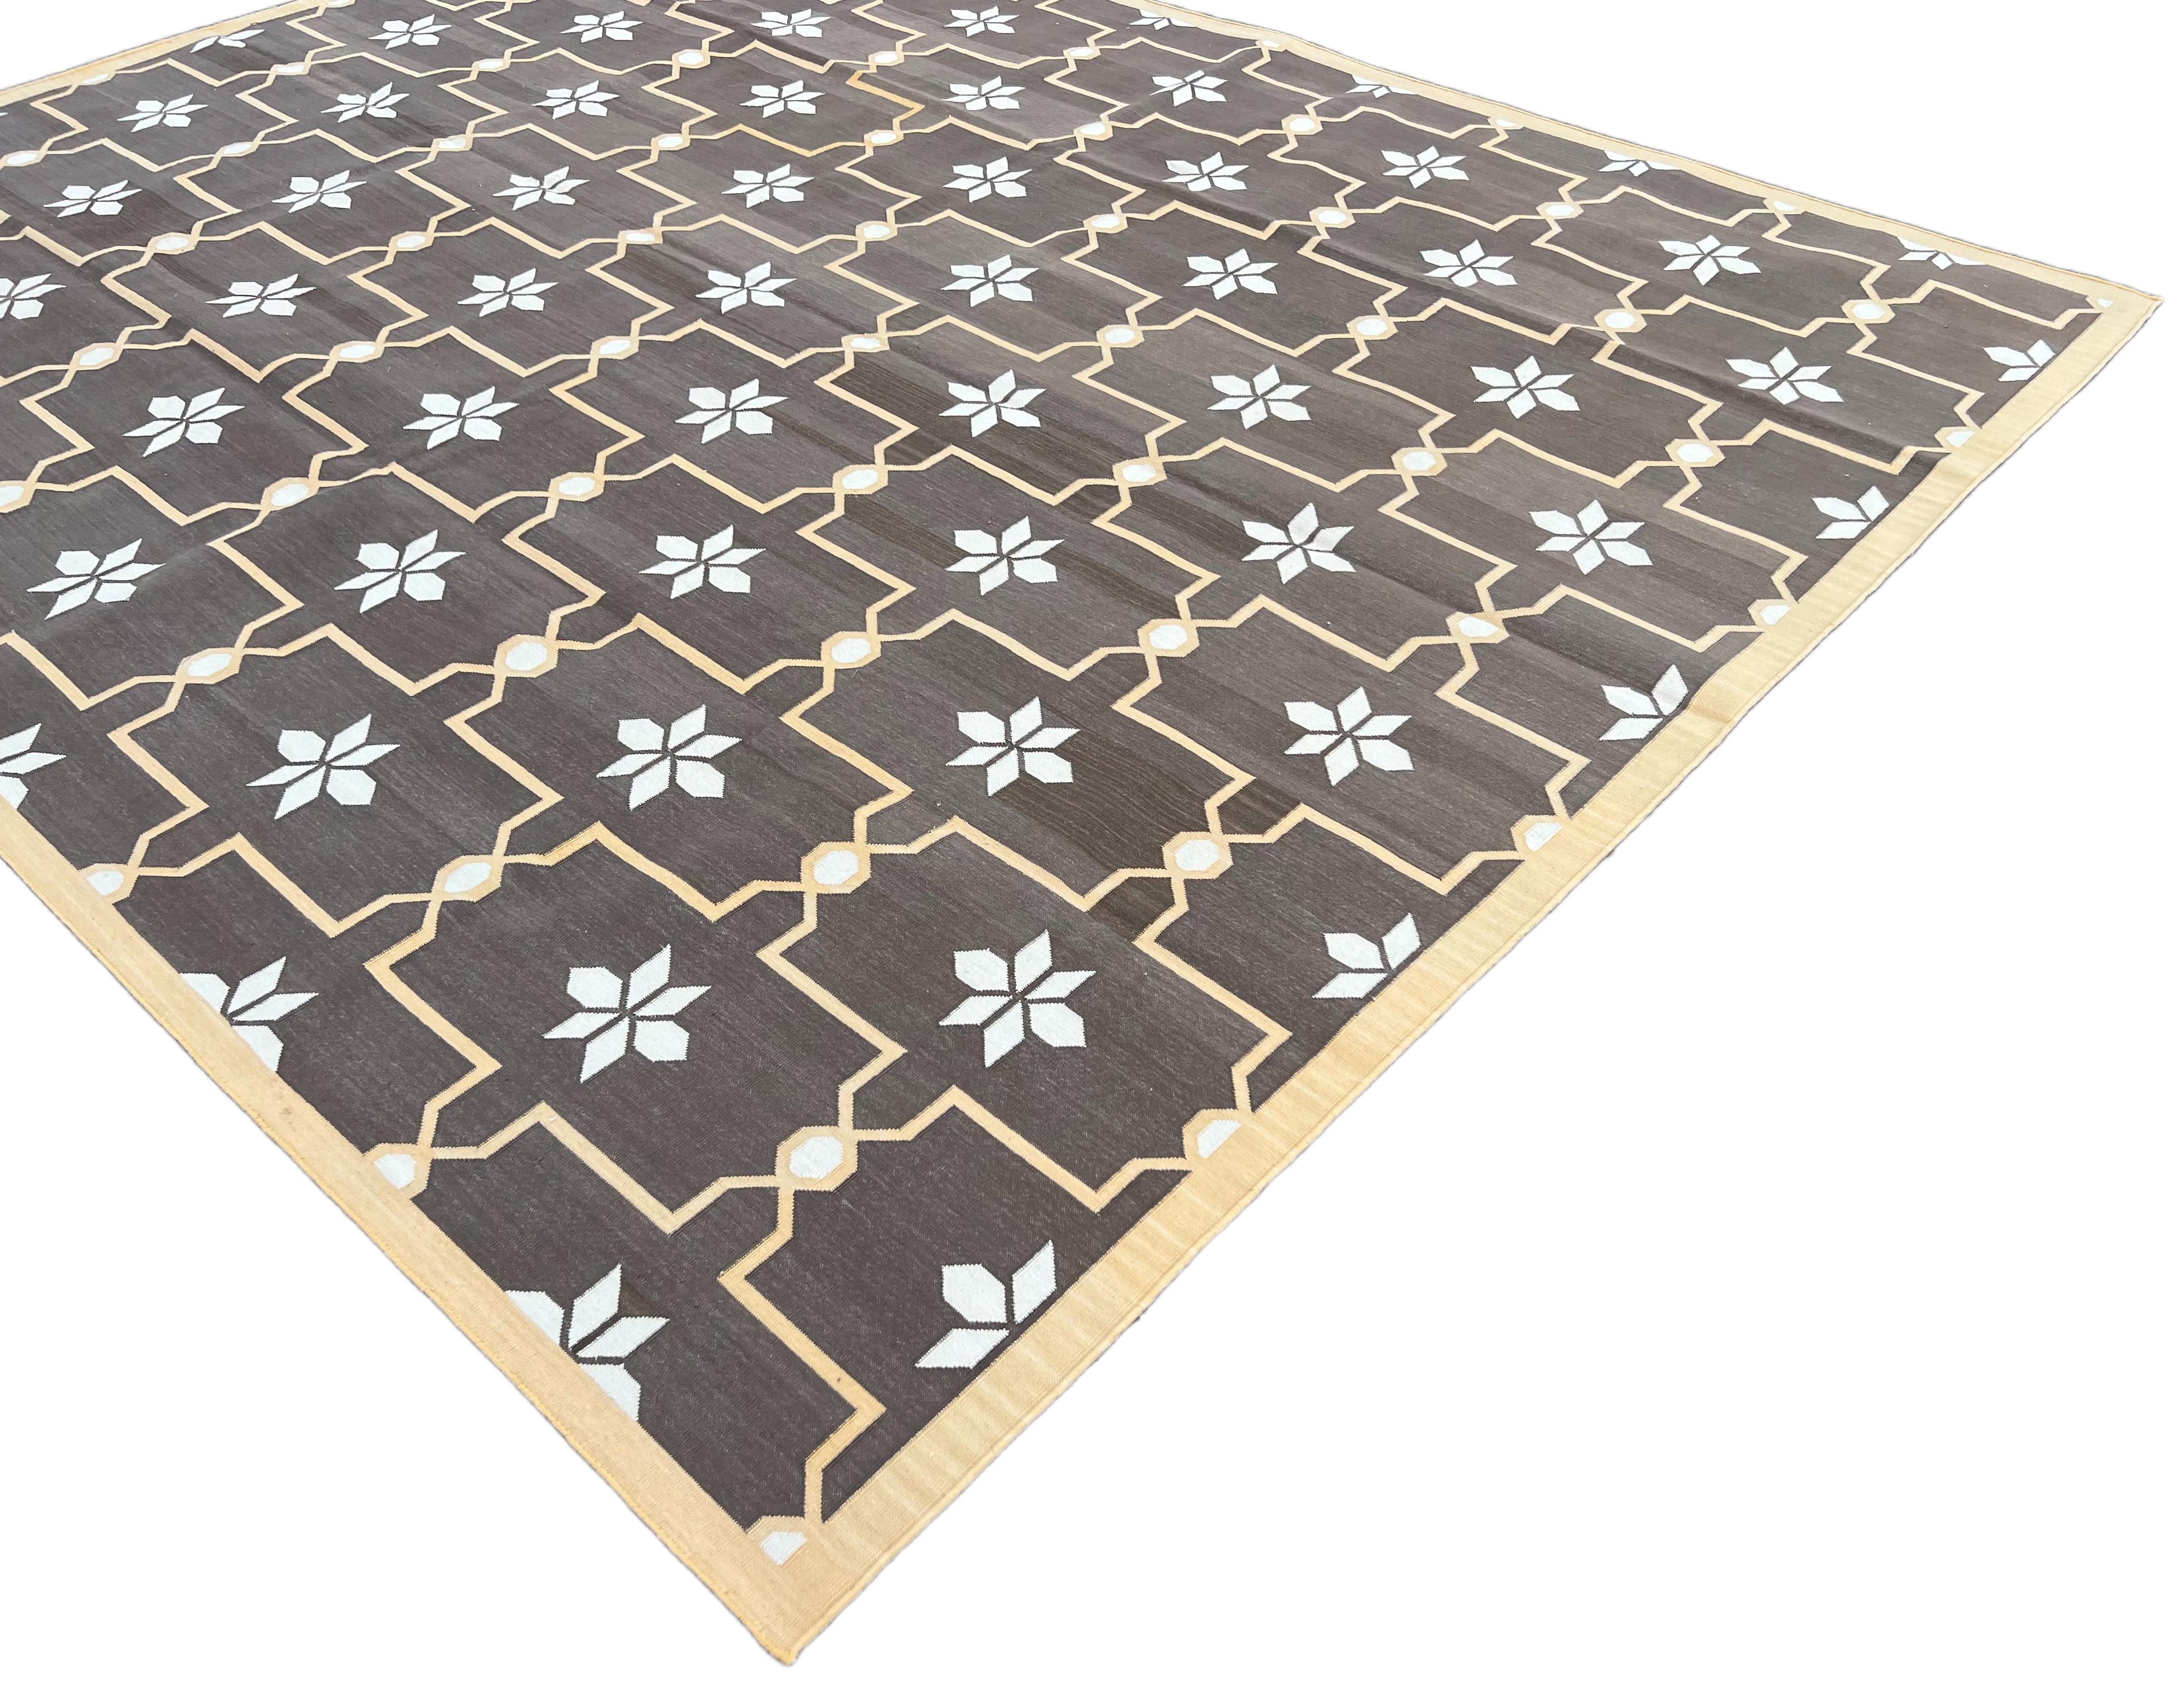 Indian Handmade Cotton Area Flat Weave Rug, Brown And Cream Flower Pattern Dhurrie Rug For Sale